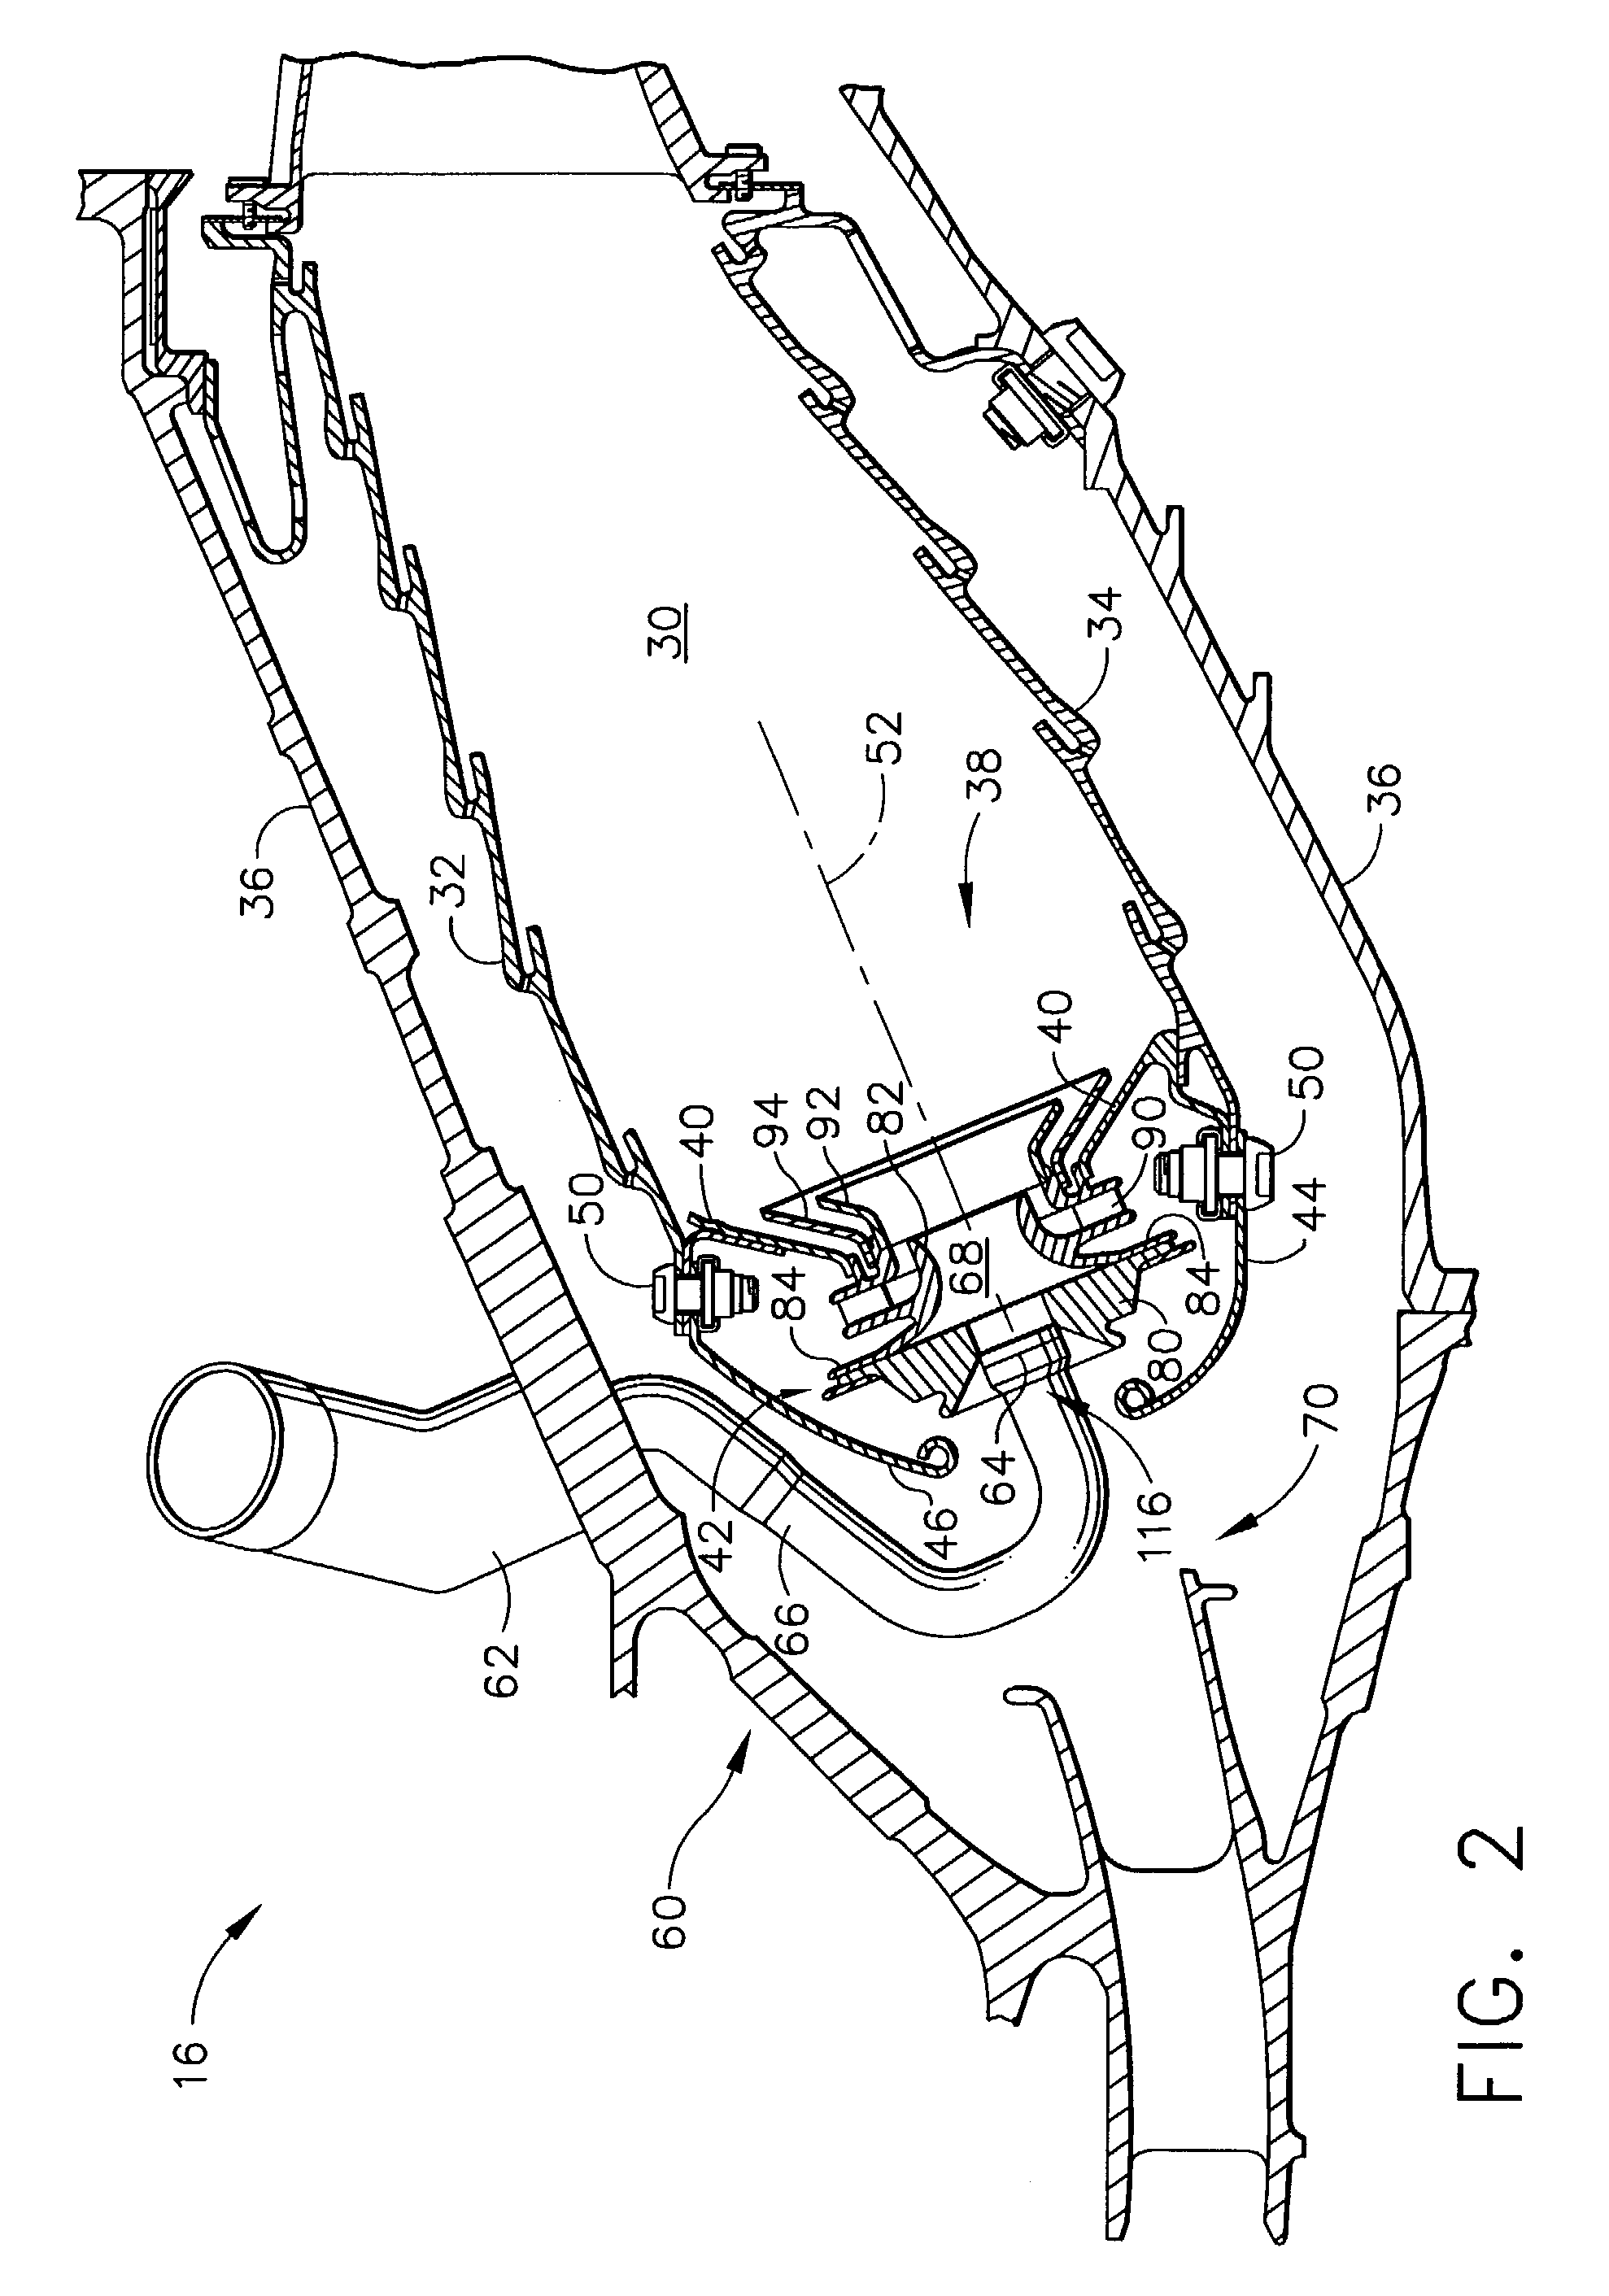 Methods and apparatus for injecting cleaning fluids into combustors